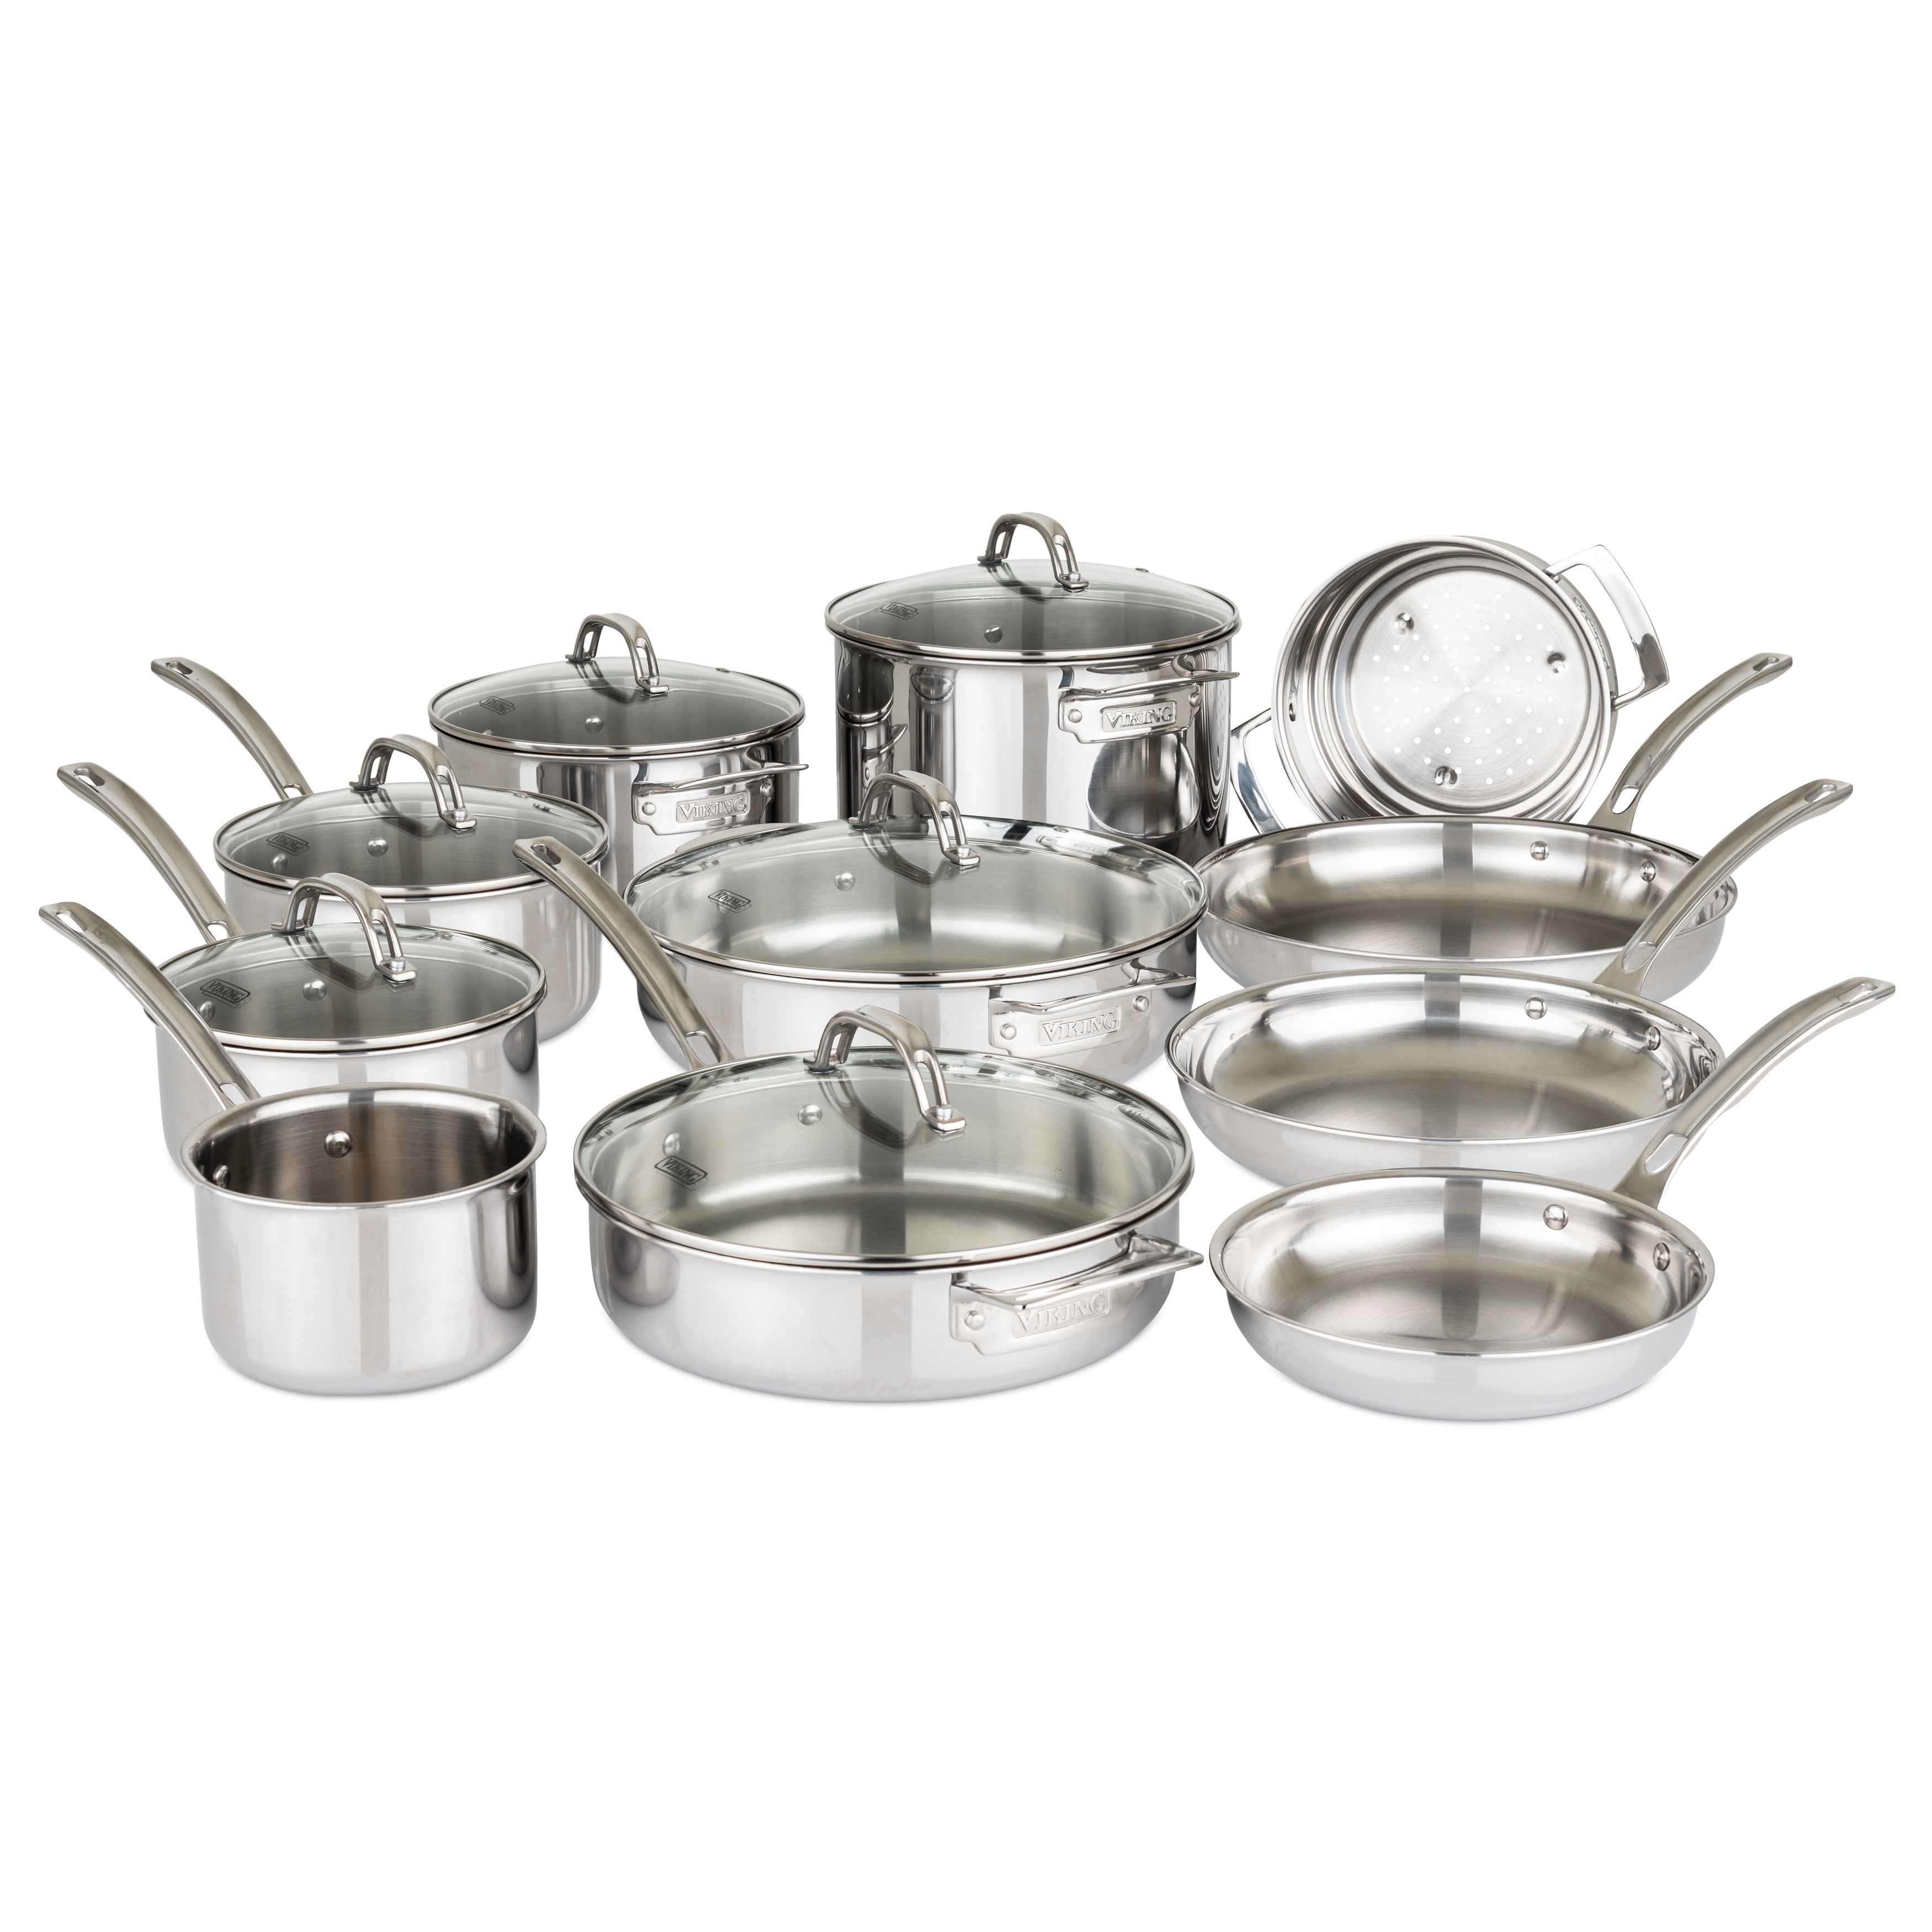 https://ak1.ostkcdn.com/images/products/is/images/direct/1b3c408eb54c5d38e833e27a98836cc017a70322/Viking-3-Ply-Stainless-Steel-17-piece-Cookware-Set-with-Glass-Lids.jpg